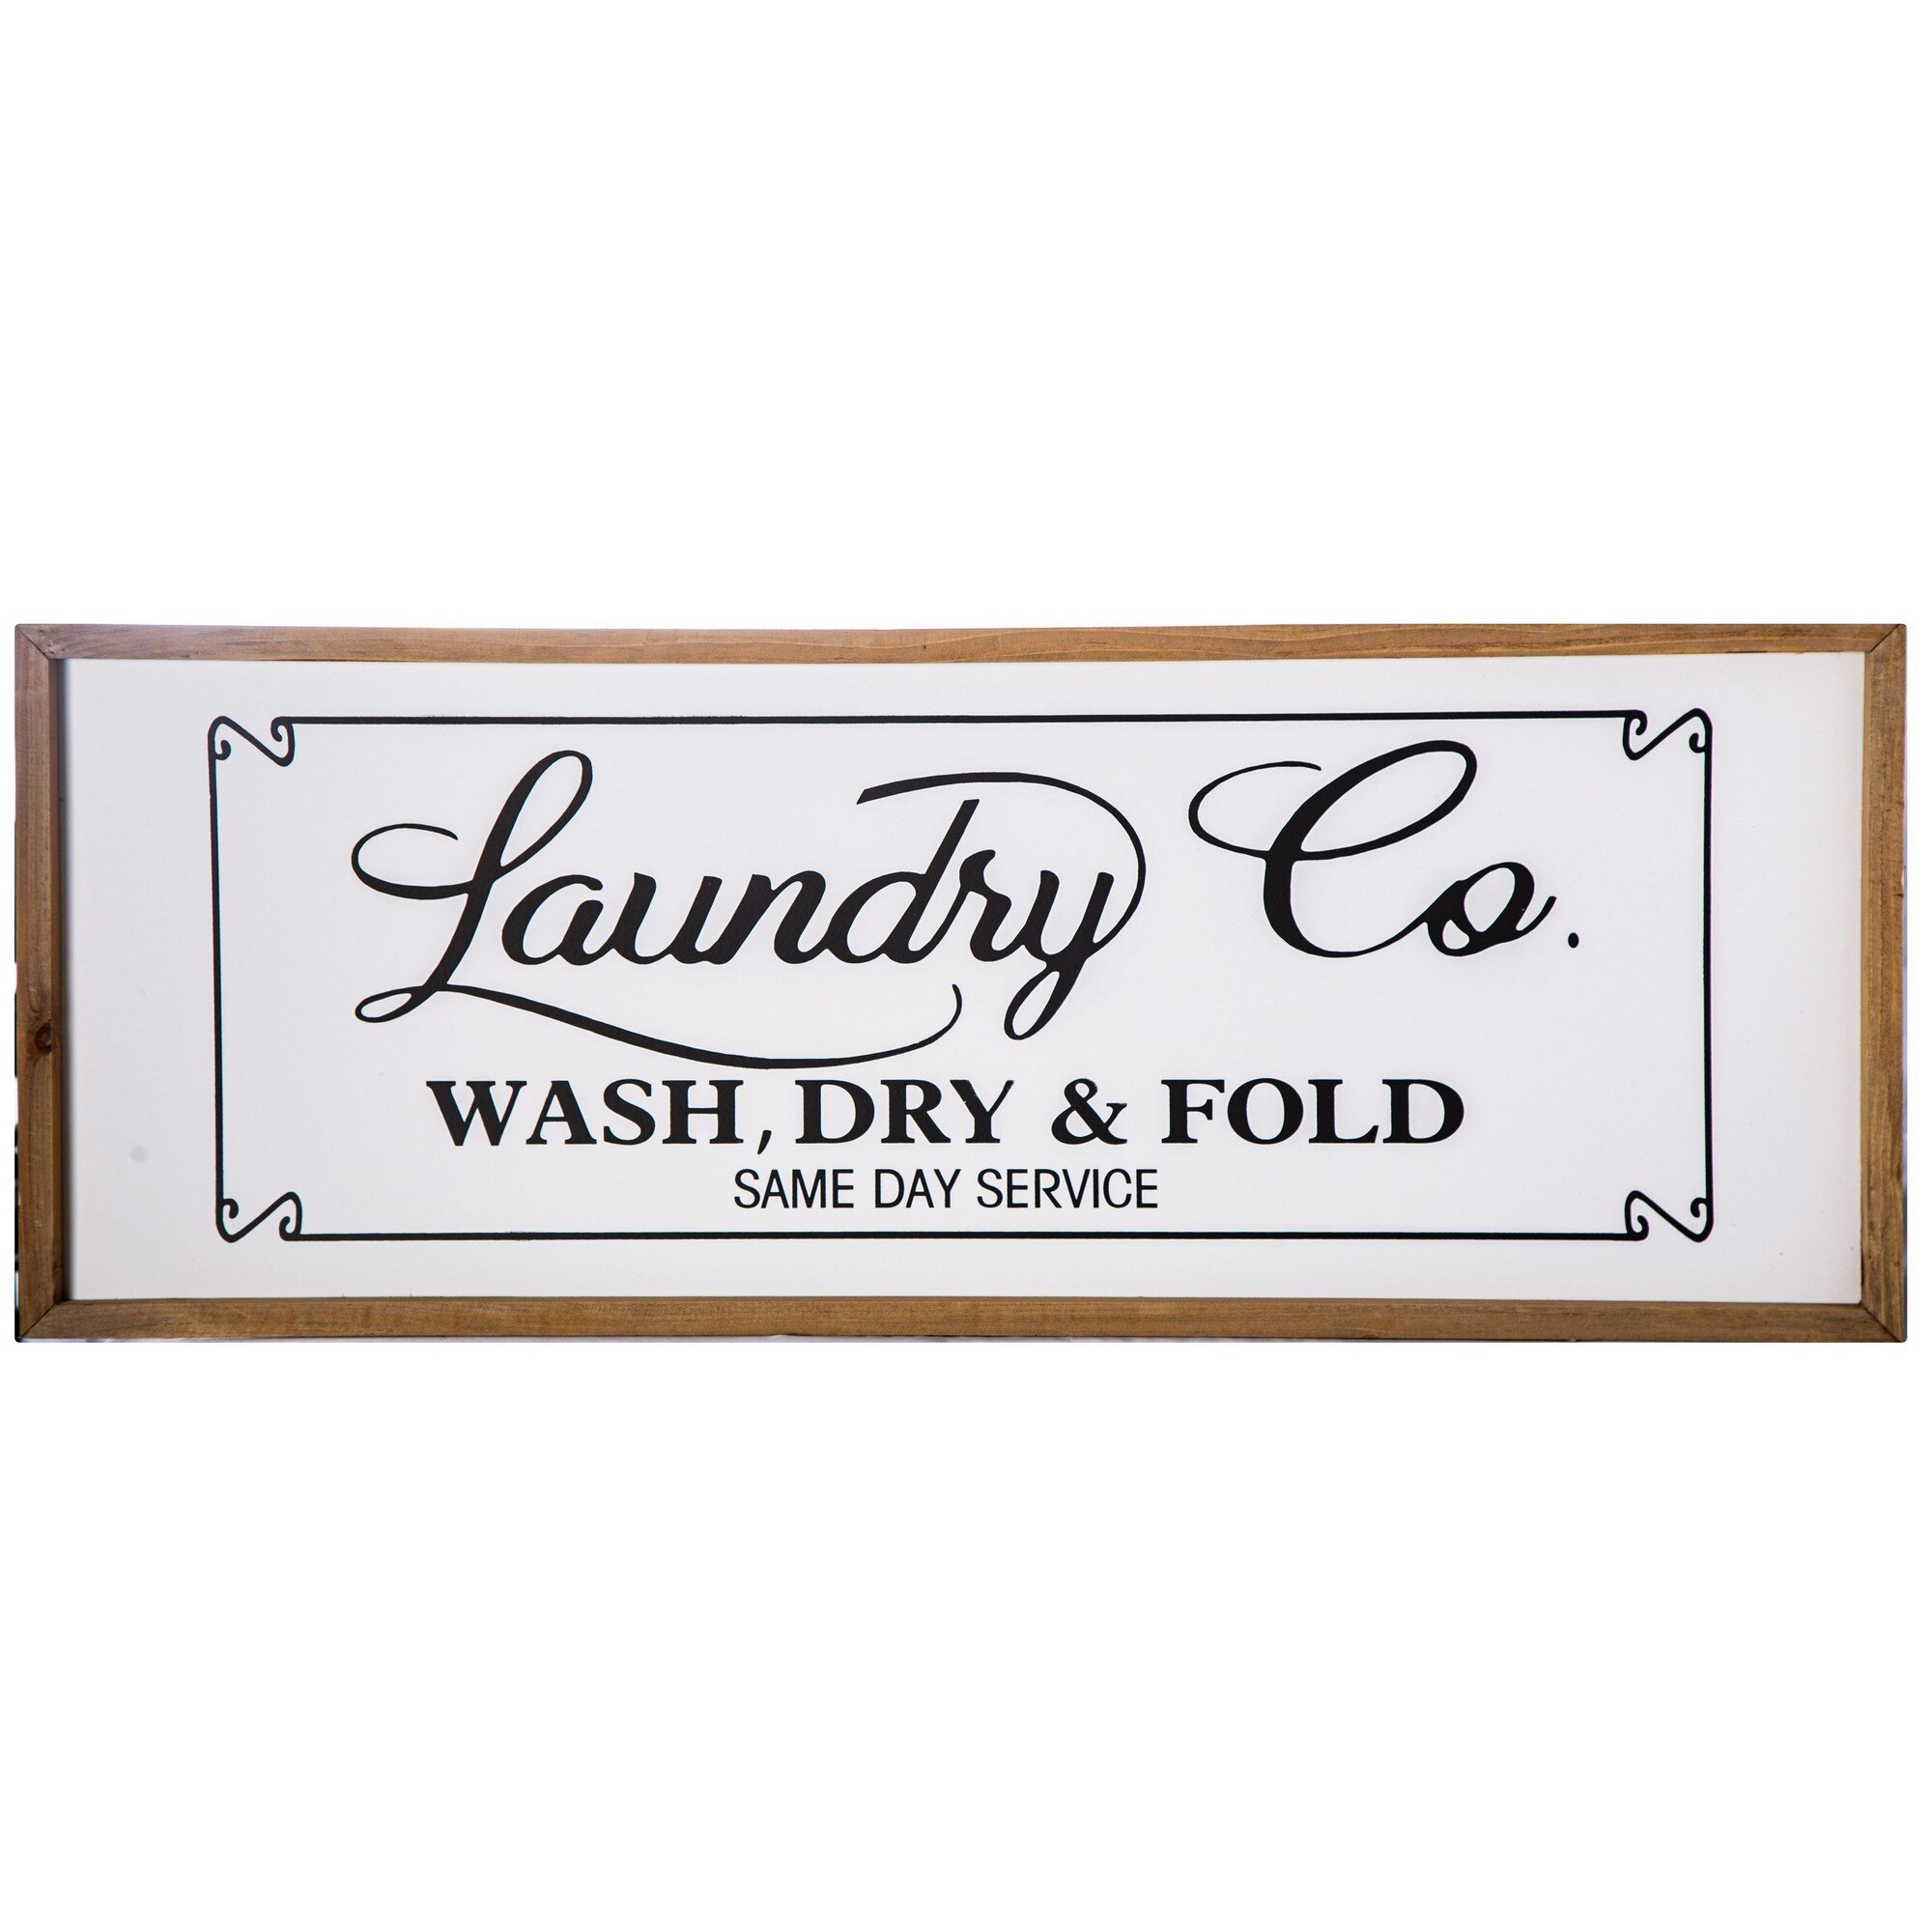 Rosalind Wheeler Cursive Laundry Co - Picture Frame Textual Art on Wood ...